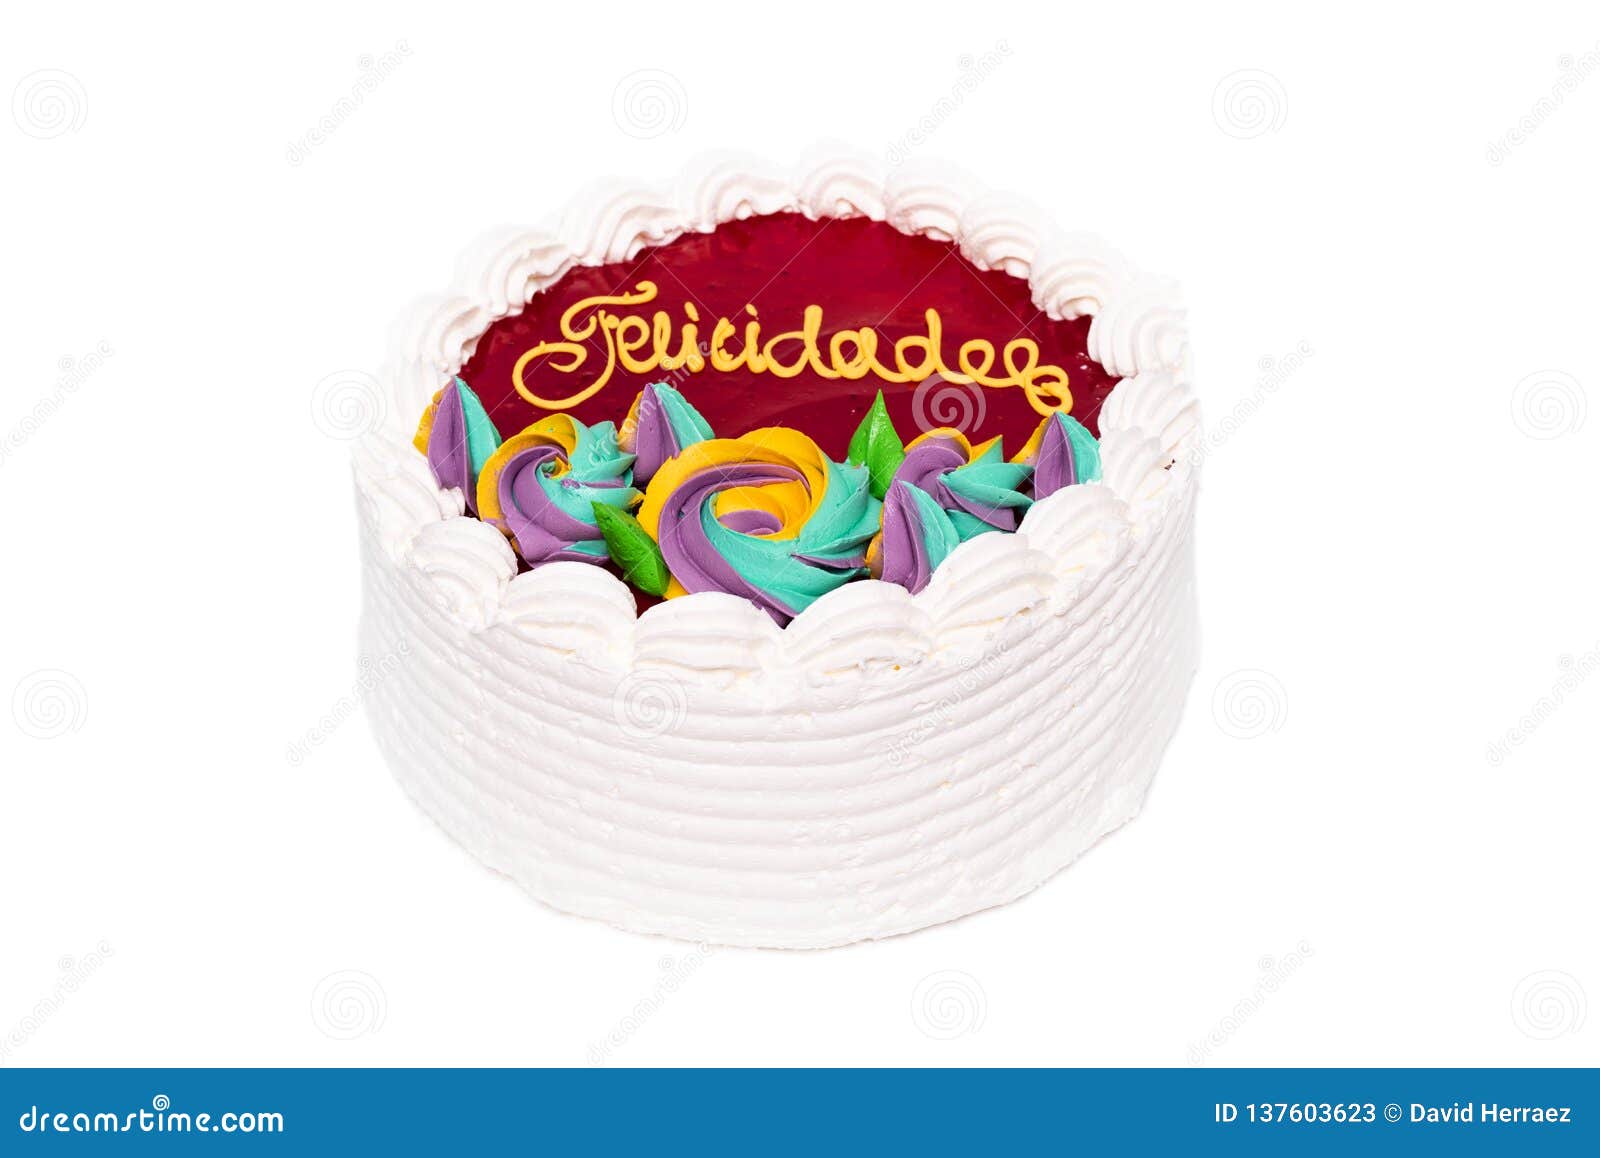 delicious spanish birthday cream cake on white  background. with spanish text felicidades, in the cake.